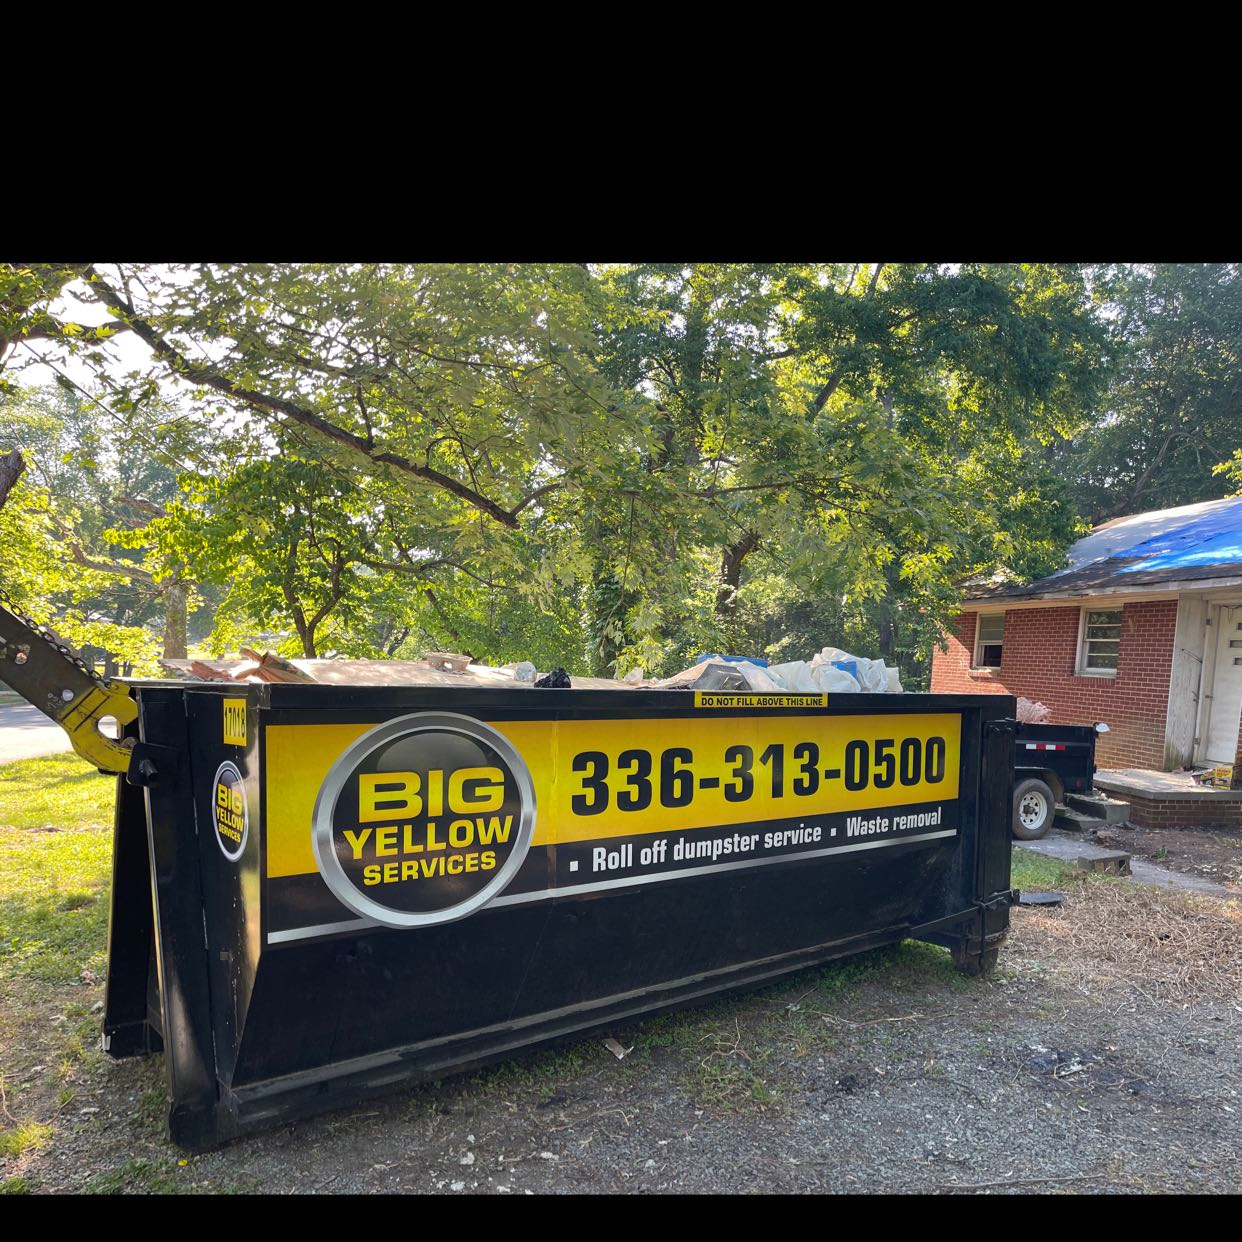 A-1933 Wilkins Street Burlington, NC 27217 Privacy Policy | Roll-Off Dumpster and Portable Toilet Rentals